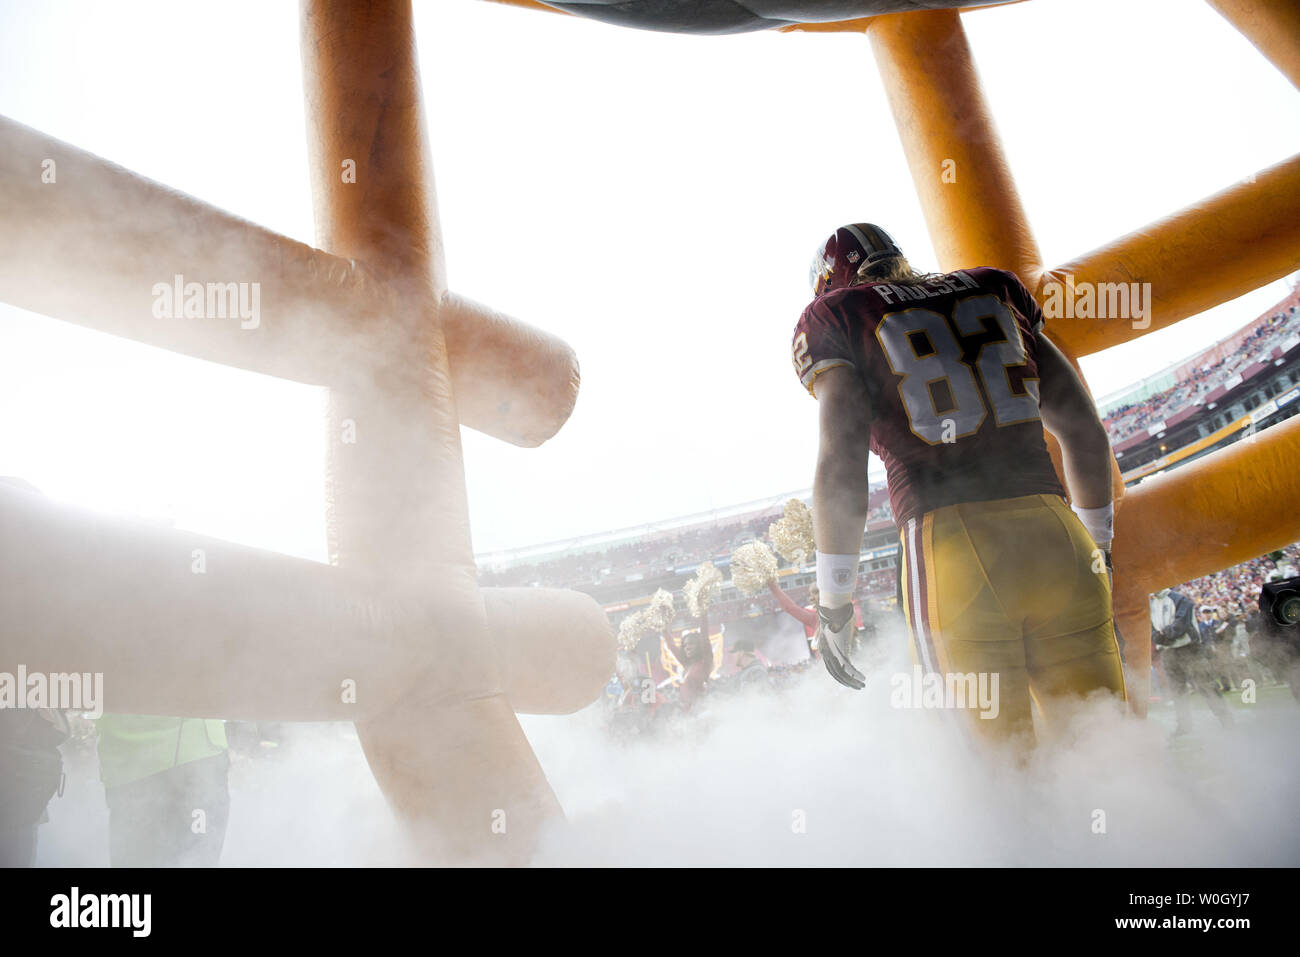 Washington Redskins tight end Logan Paulsen prepares to take the field prior to the Redskins game against the Baltimore Ravens at FedEx Field in Landover, Maryland on December 9, 2012.  UPI/Kevin Dietsch Stock Photo